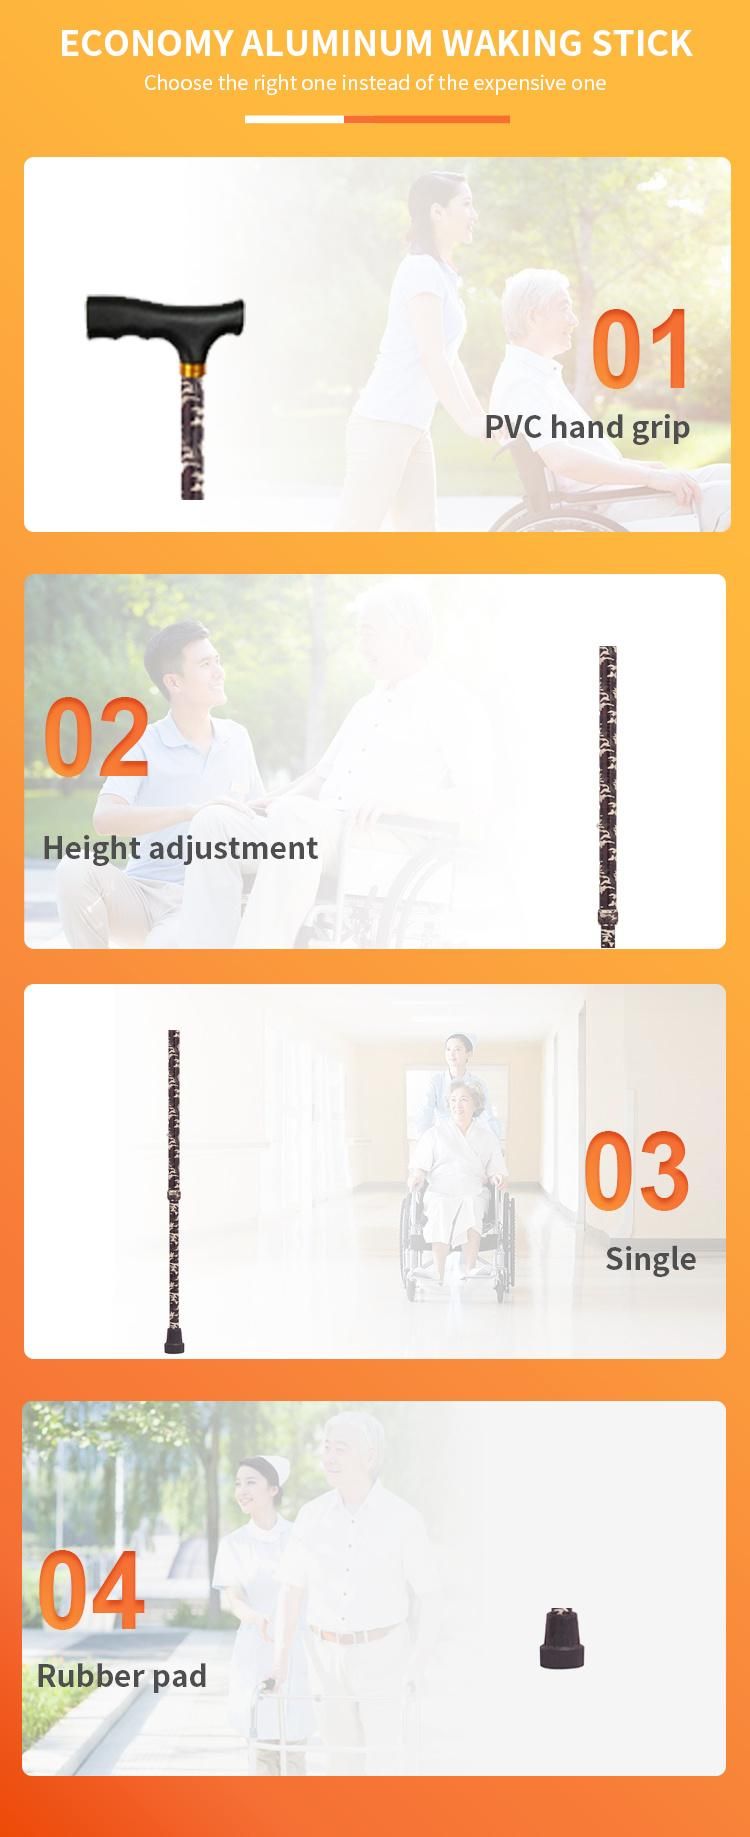 Non-Slip Grip and Foot Pad 2 Colors for Choose Aluminum Lightweight Easy Carry Cane portable Adjustable Height Walking Stick Weight Capacity 100kgs